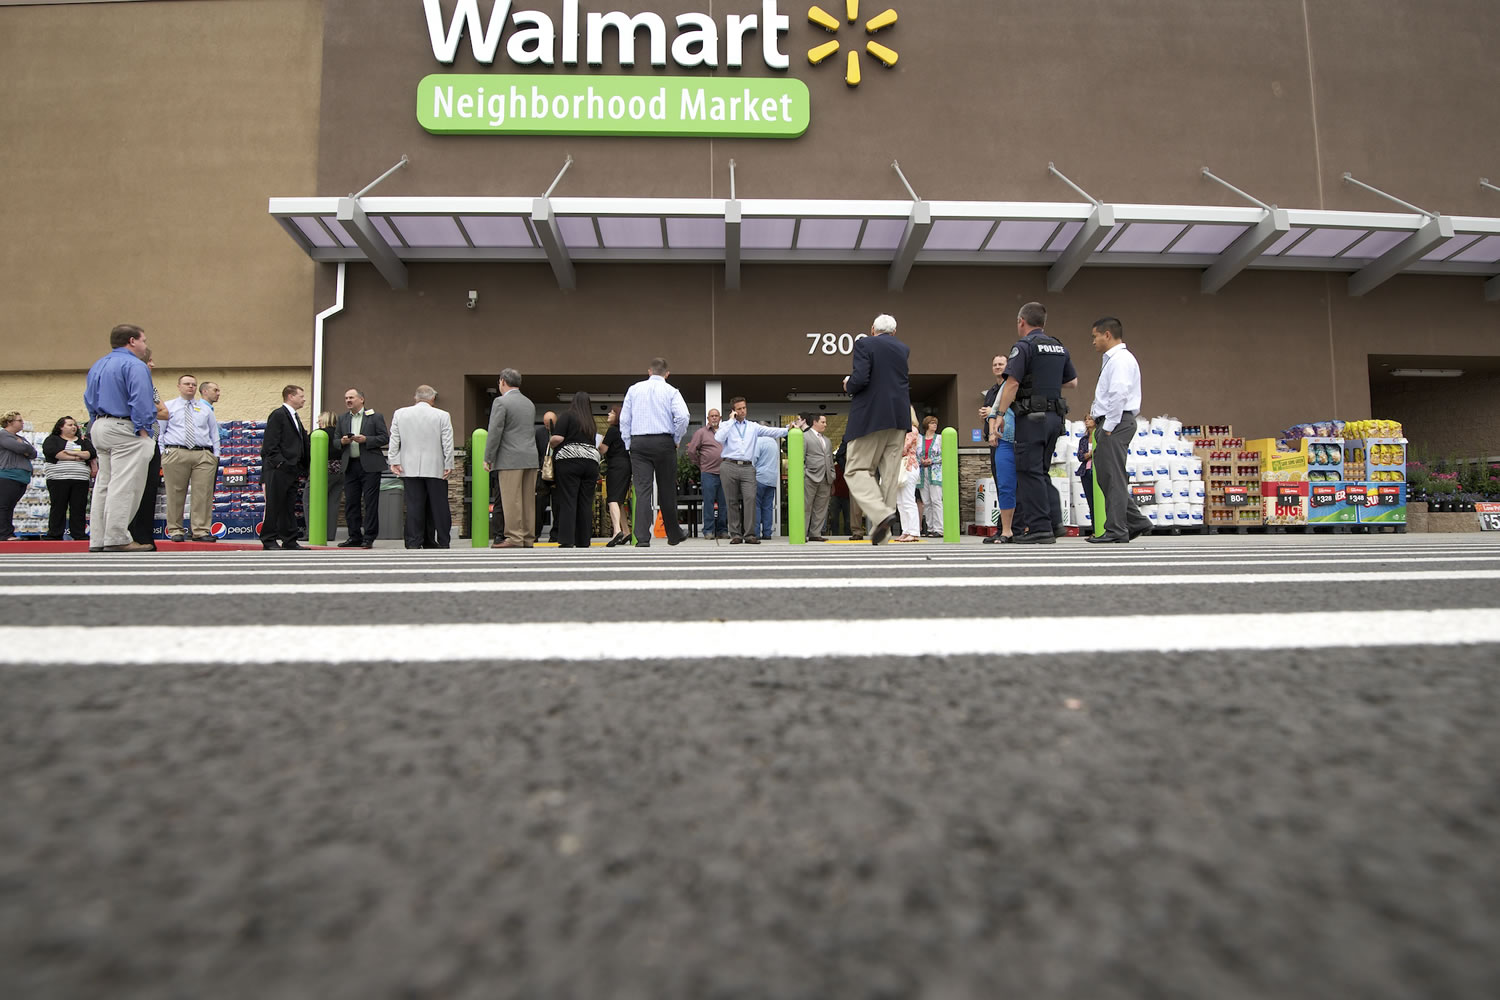 In July, Wal-Mart opened its first area Walmart Neighborhood Market in the Vancouver Plaza shopping center between Fourth Plain Boulevard and state Highway 500.